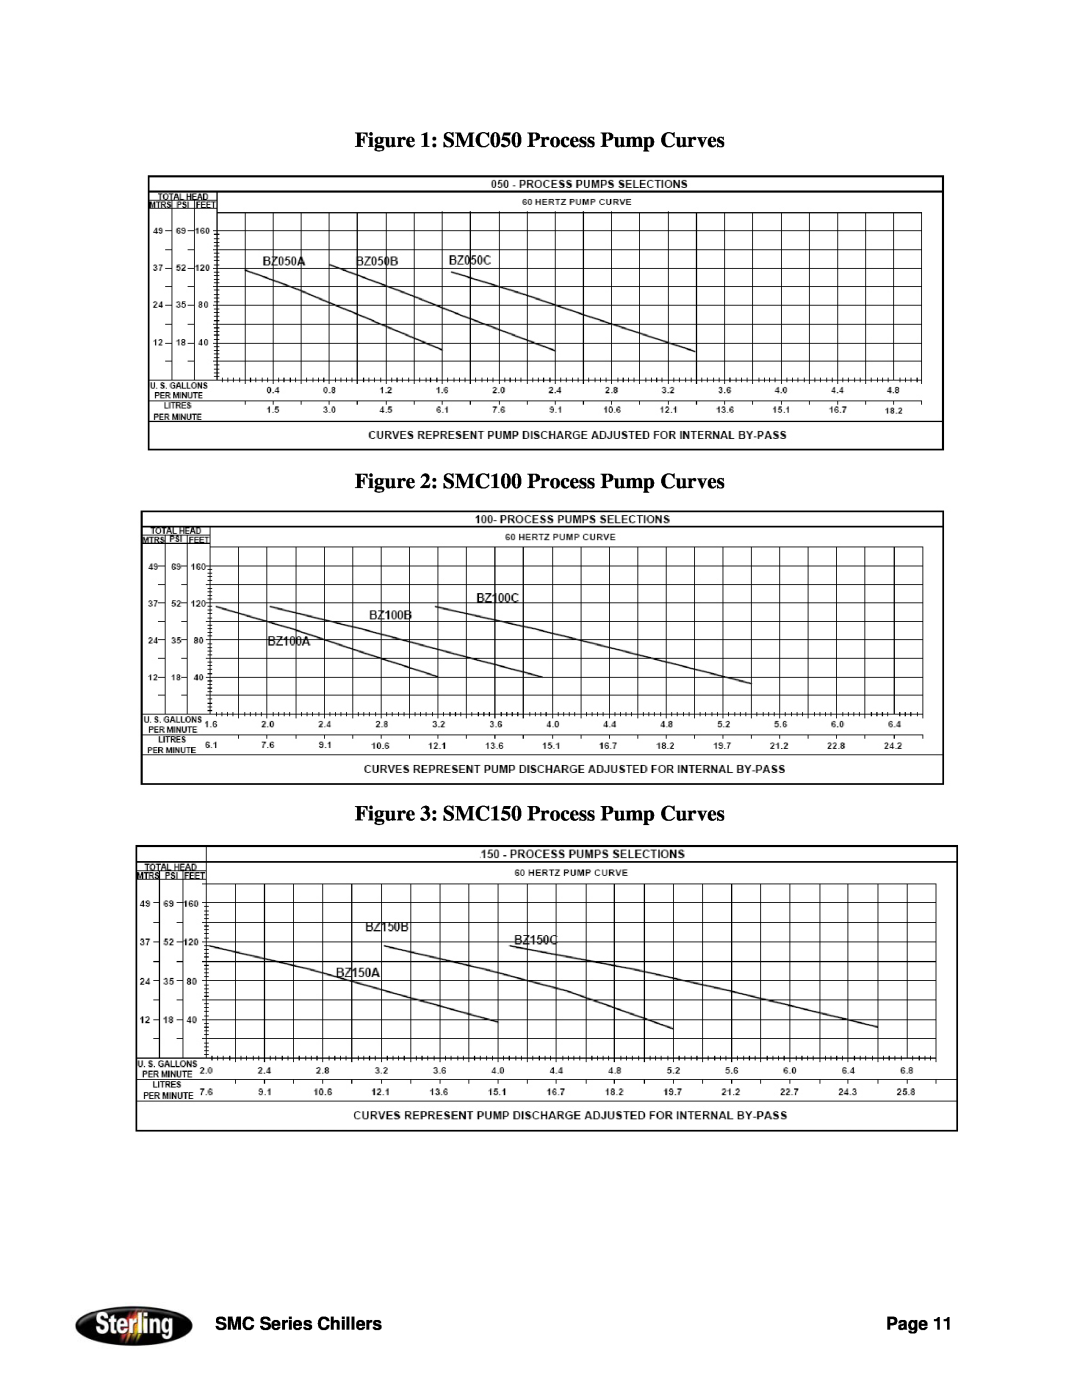 Sterling Power Products 30F to 65F SMC050 Process Pump Curves, SMC100 Process Pump Curves, SMC150 Process Pump Curves 